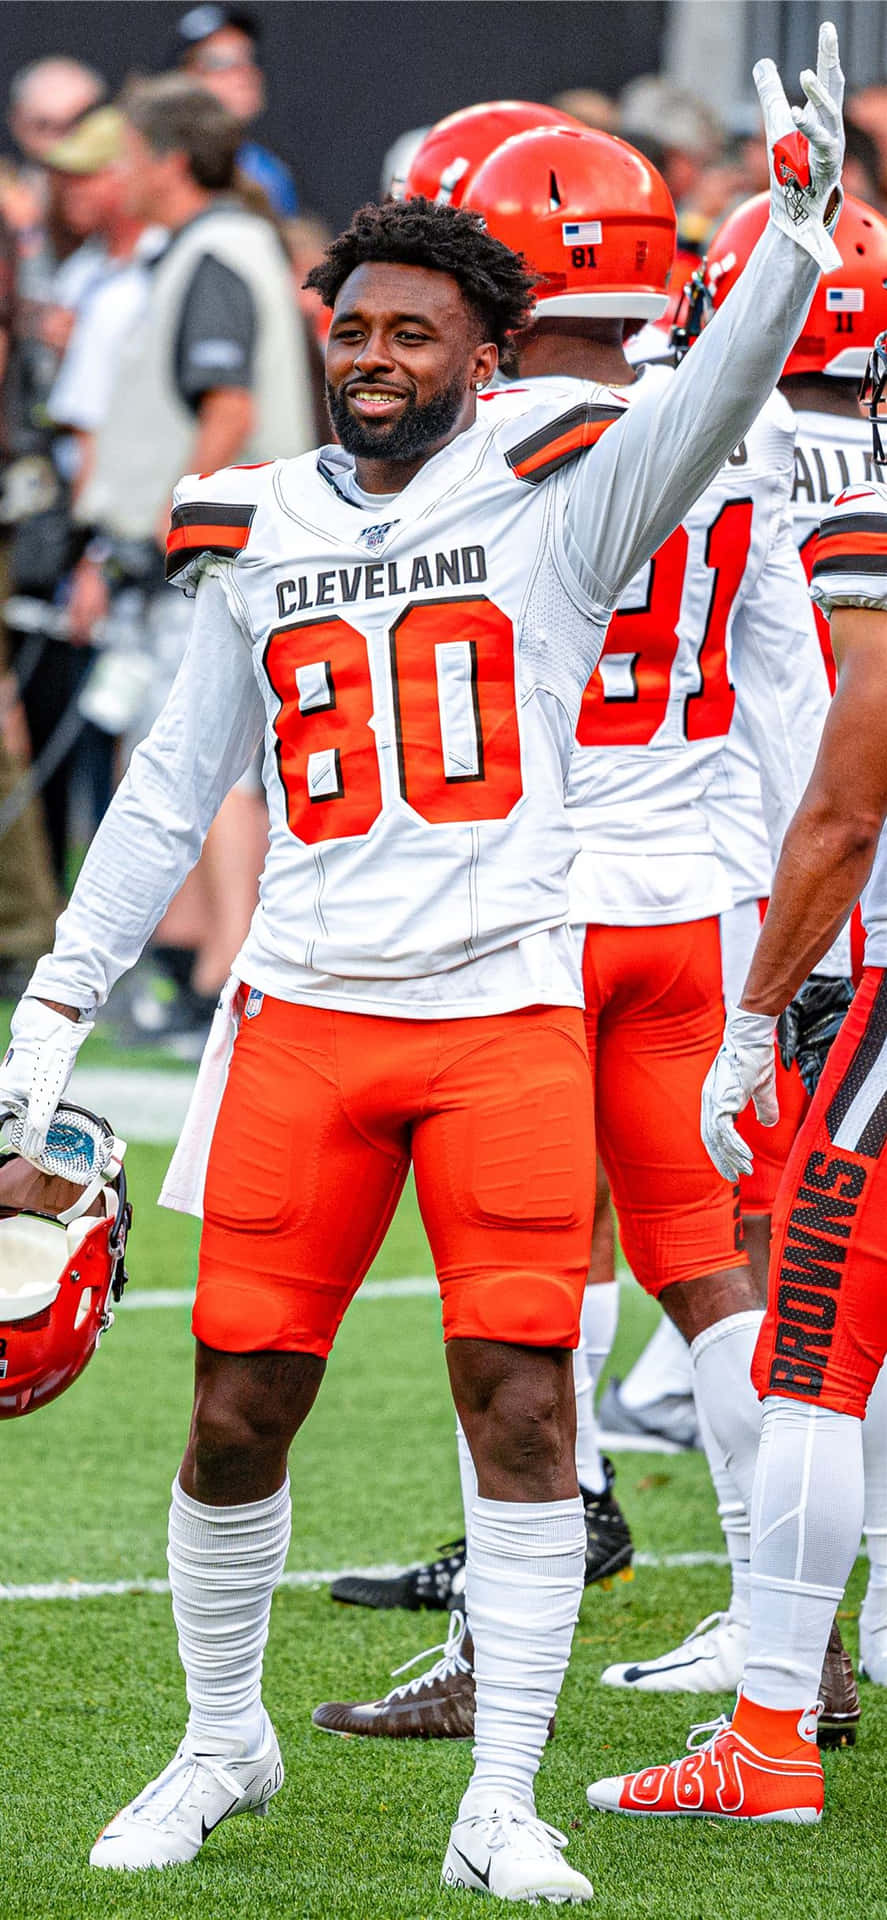 Cleveland Browns Player Celebrating On Field Wallpaper